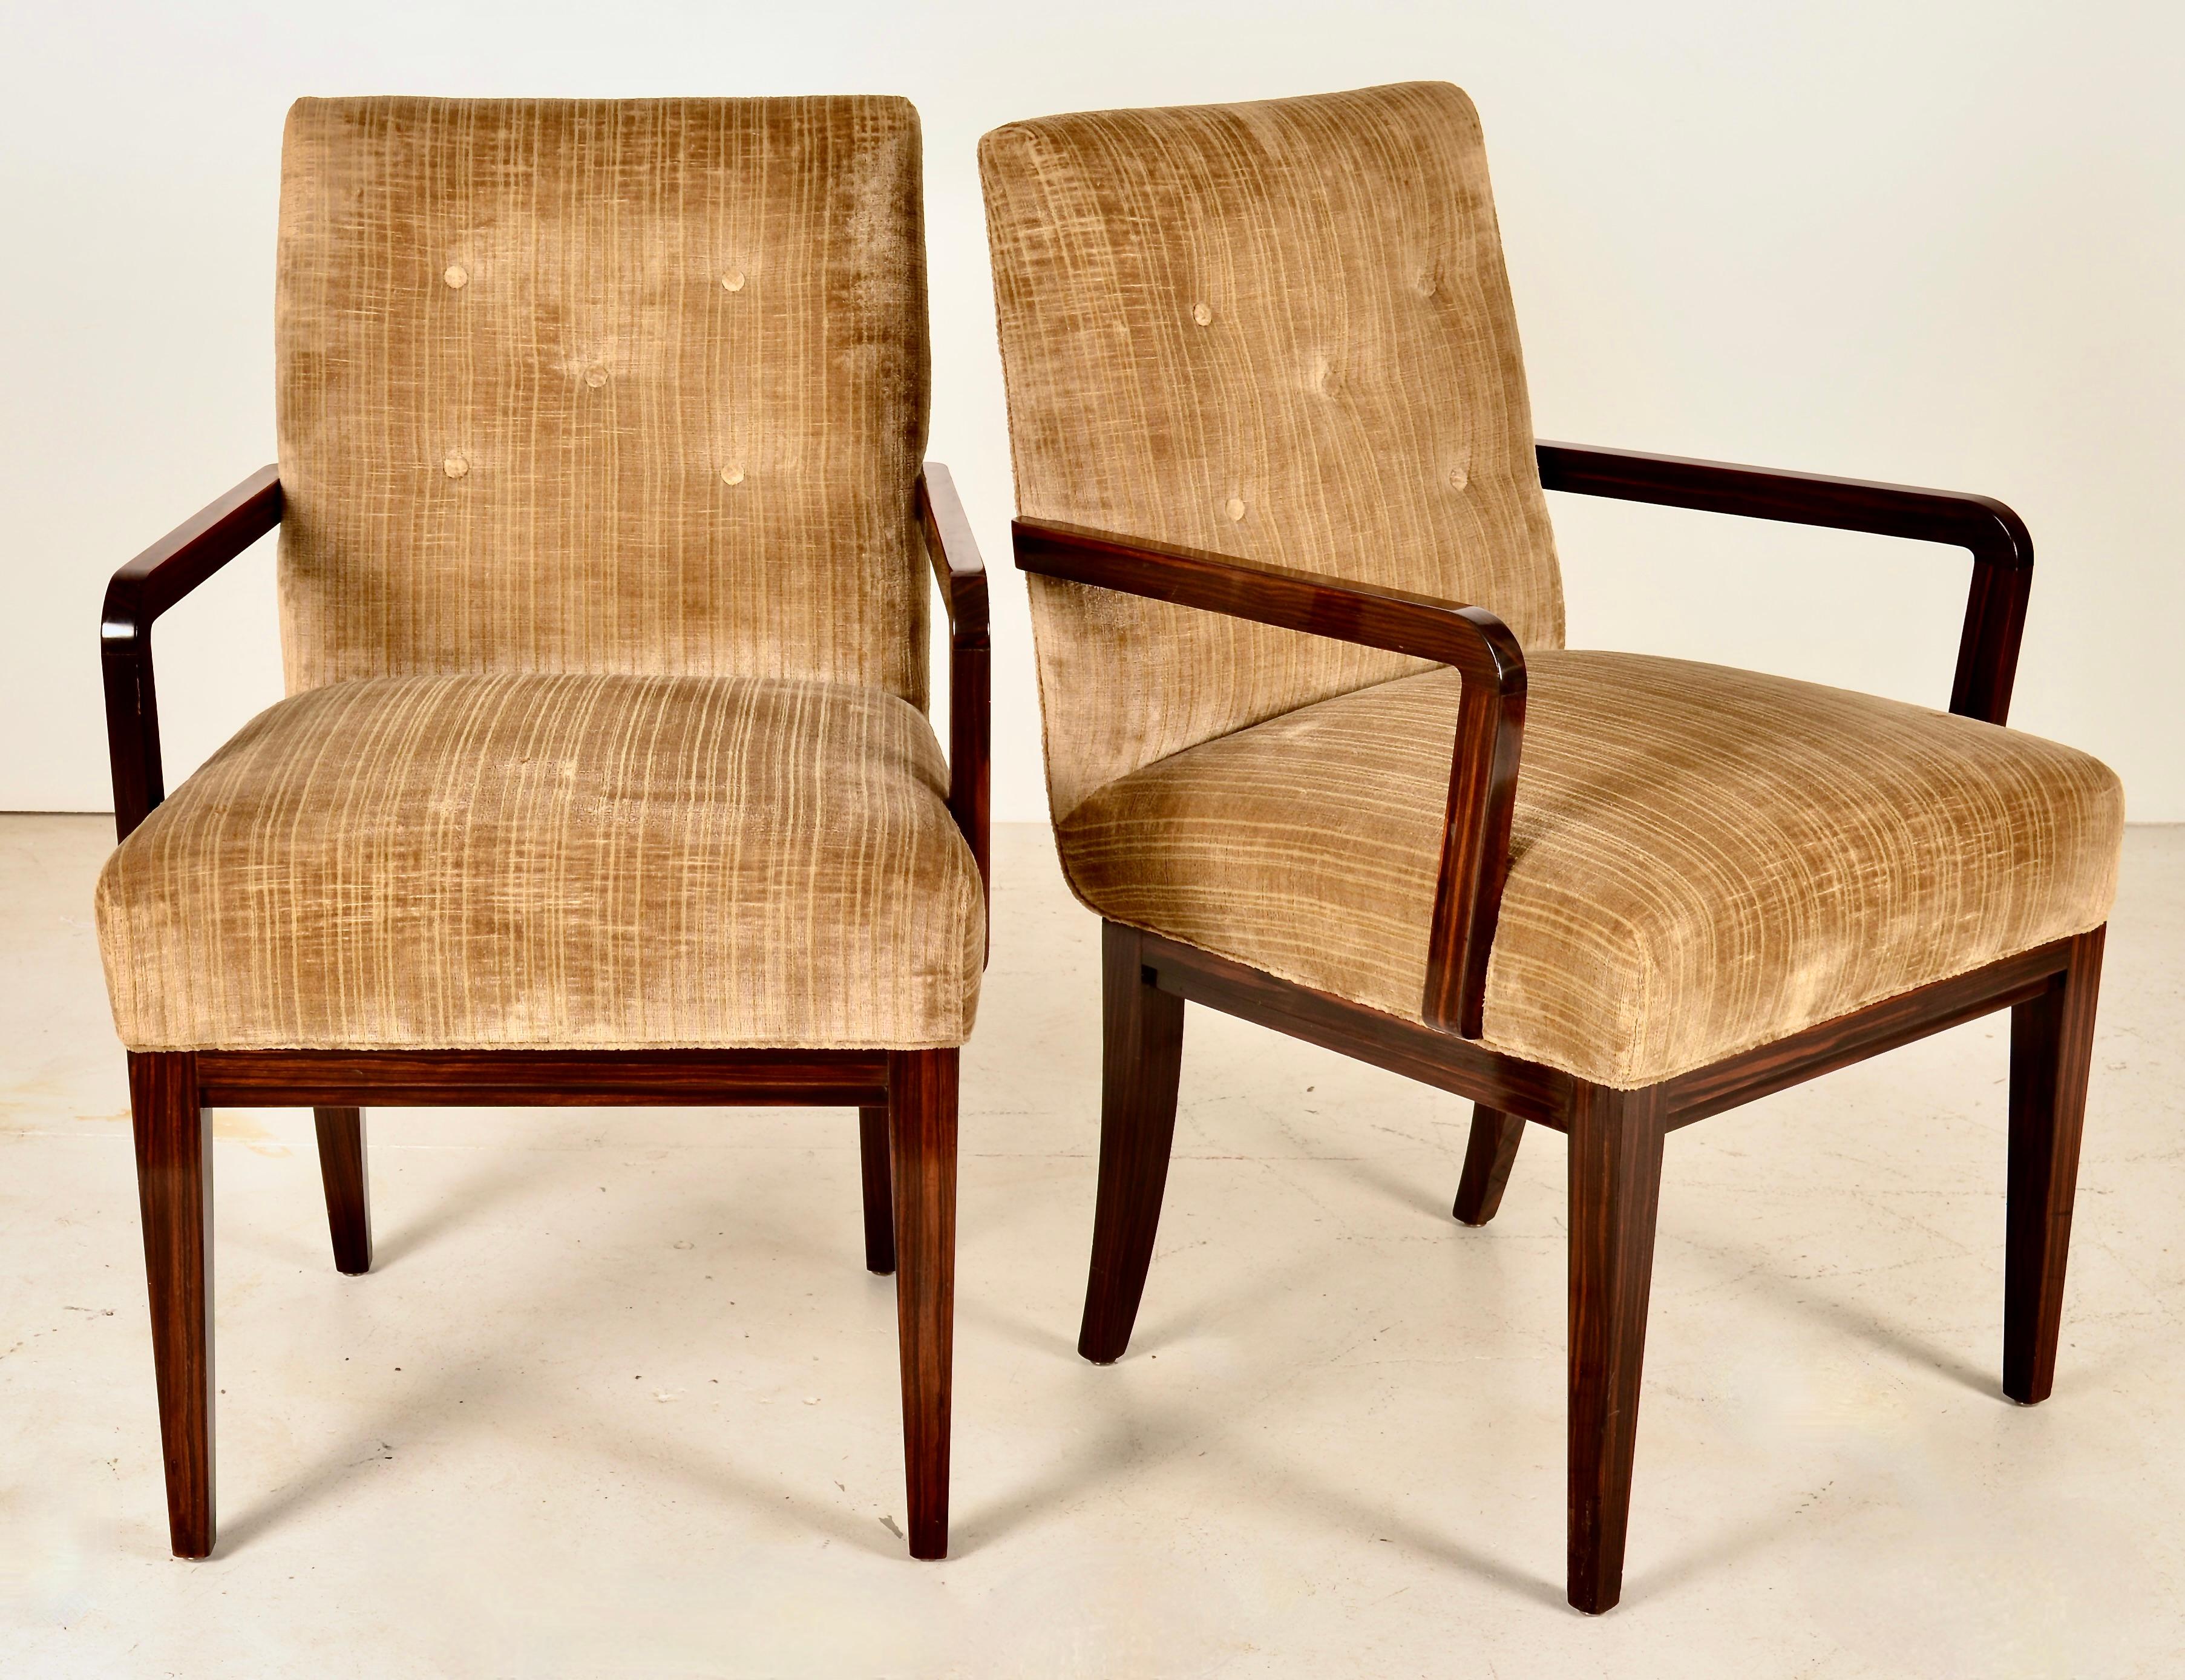 These chairs are crafted with the superb attention to detail for which Schmieg and Kotzian is renowned. The exotic zebra wood has a rich high gloss finish. The legs gently taper and the back legs have a saber form. The bottom aprons feature a subtle